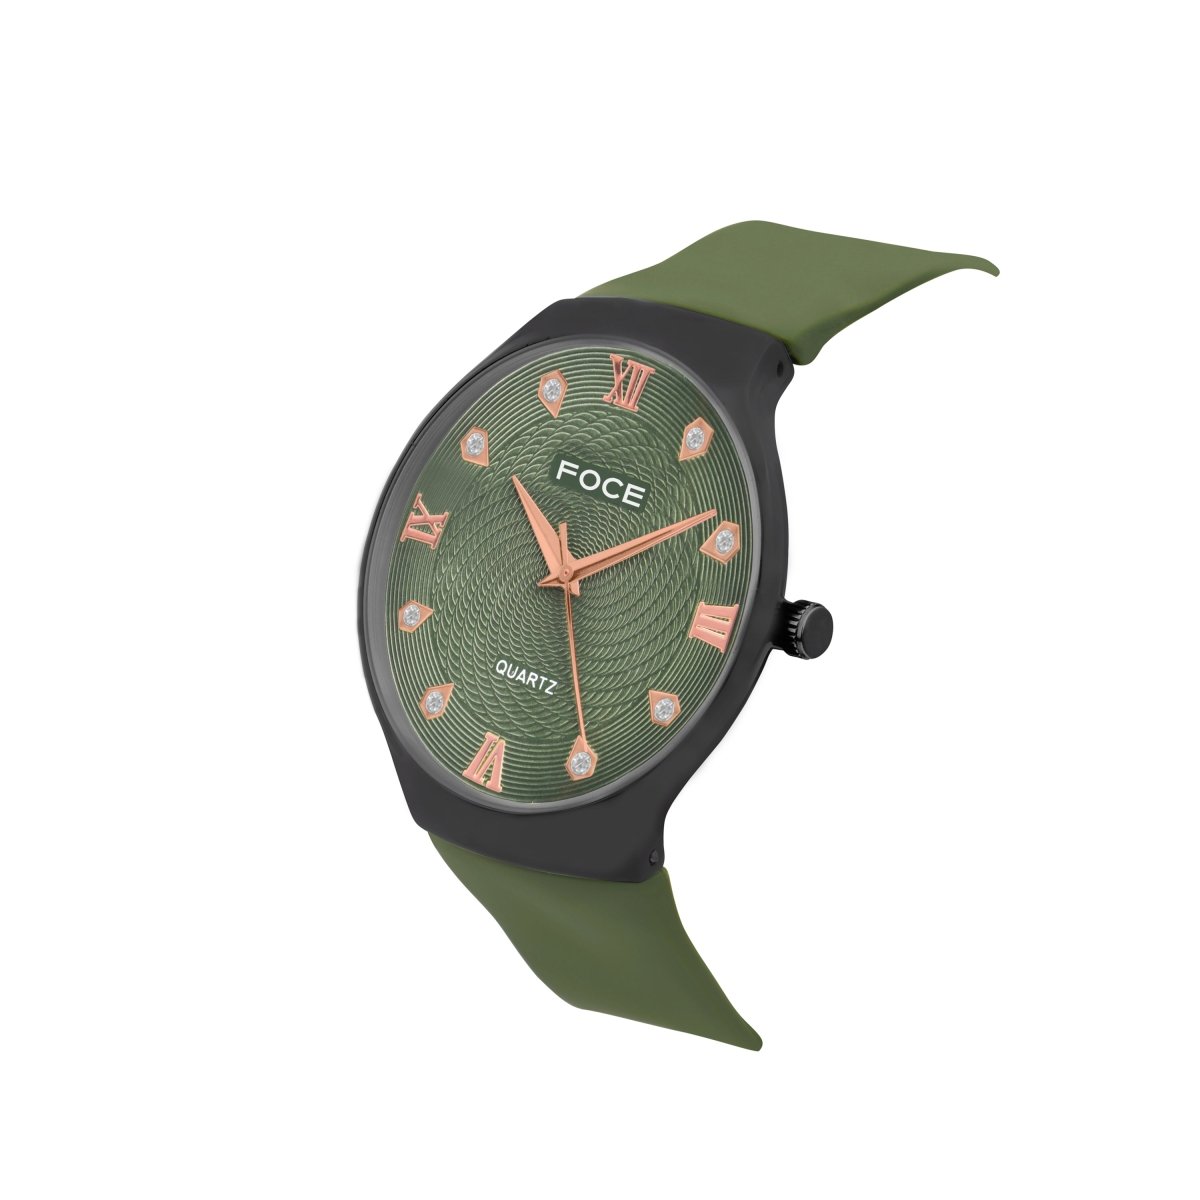 FOCE Analog Green Dial Leather Strap Watch For Men-FC-G-B2694